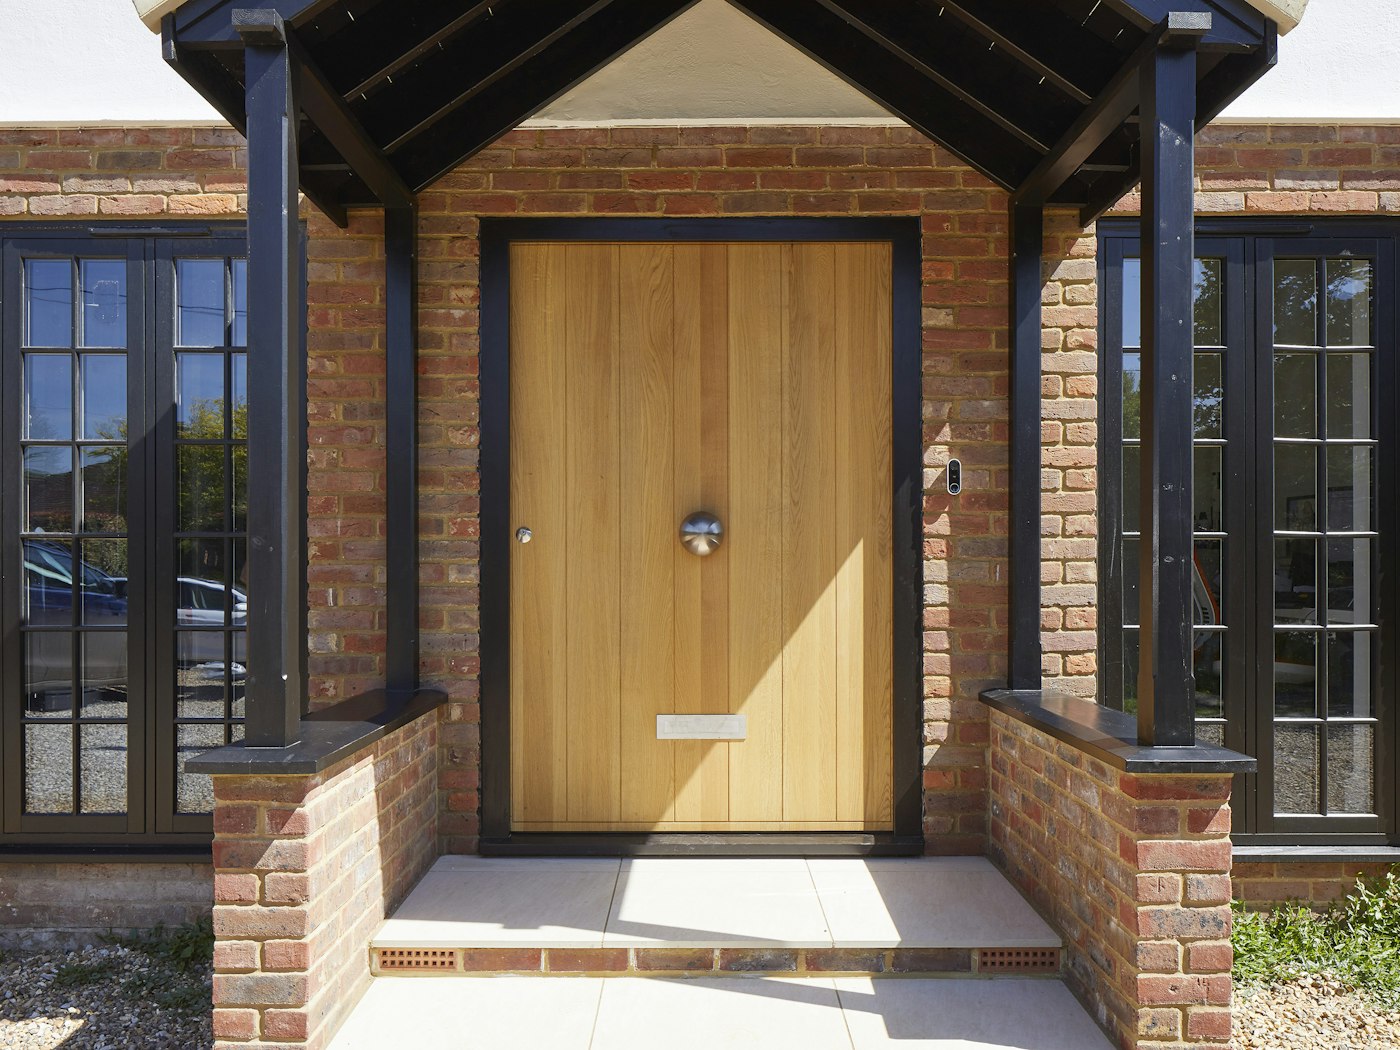 A black frame highlights the standout dimensions of this big entrance door